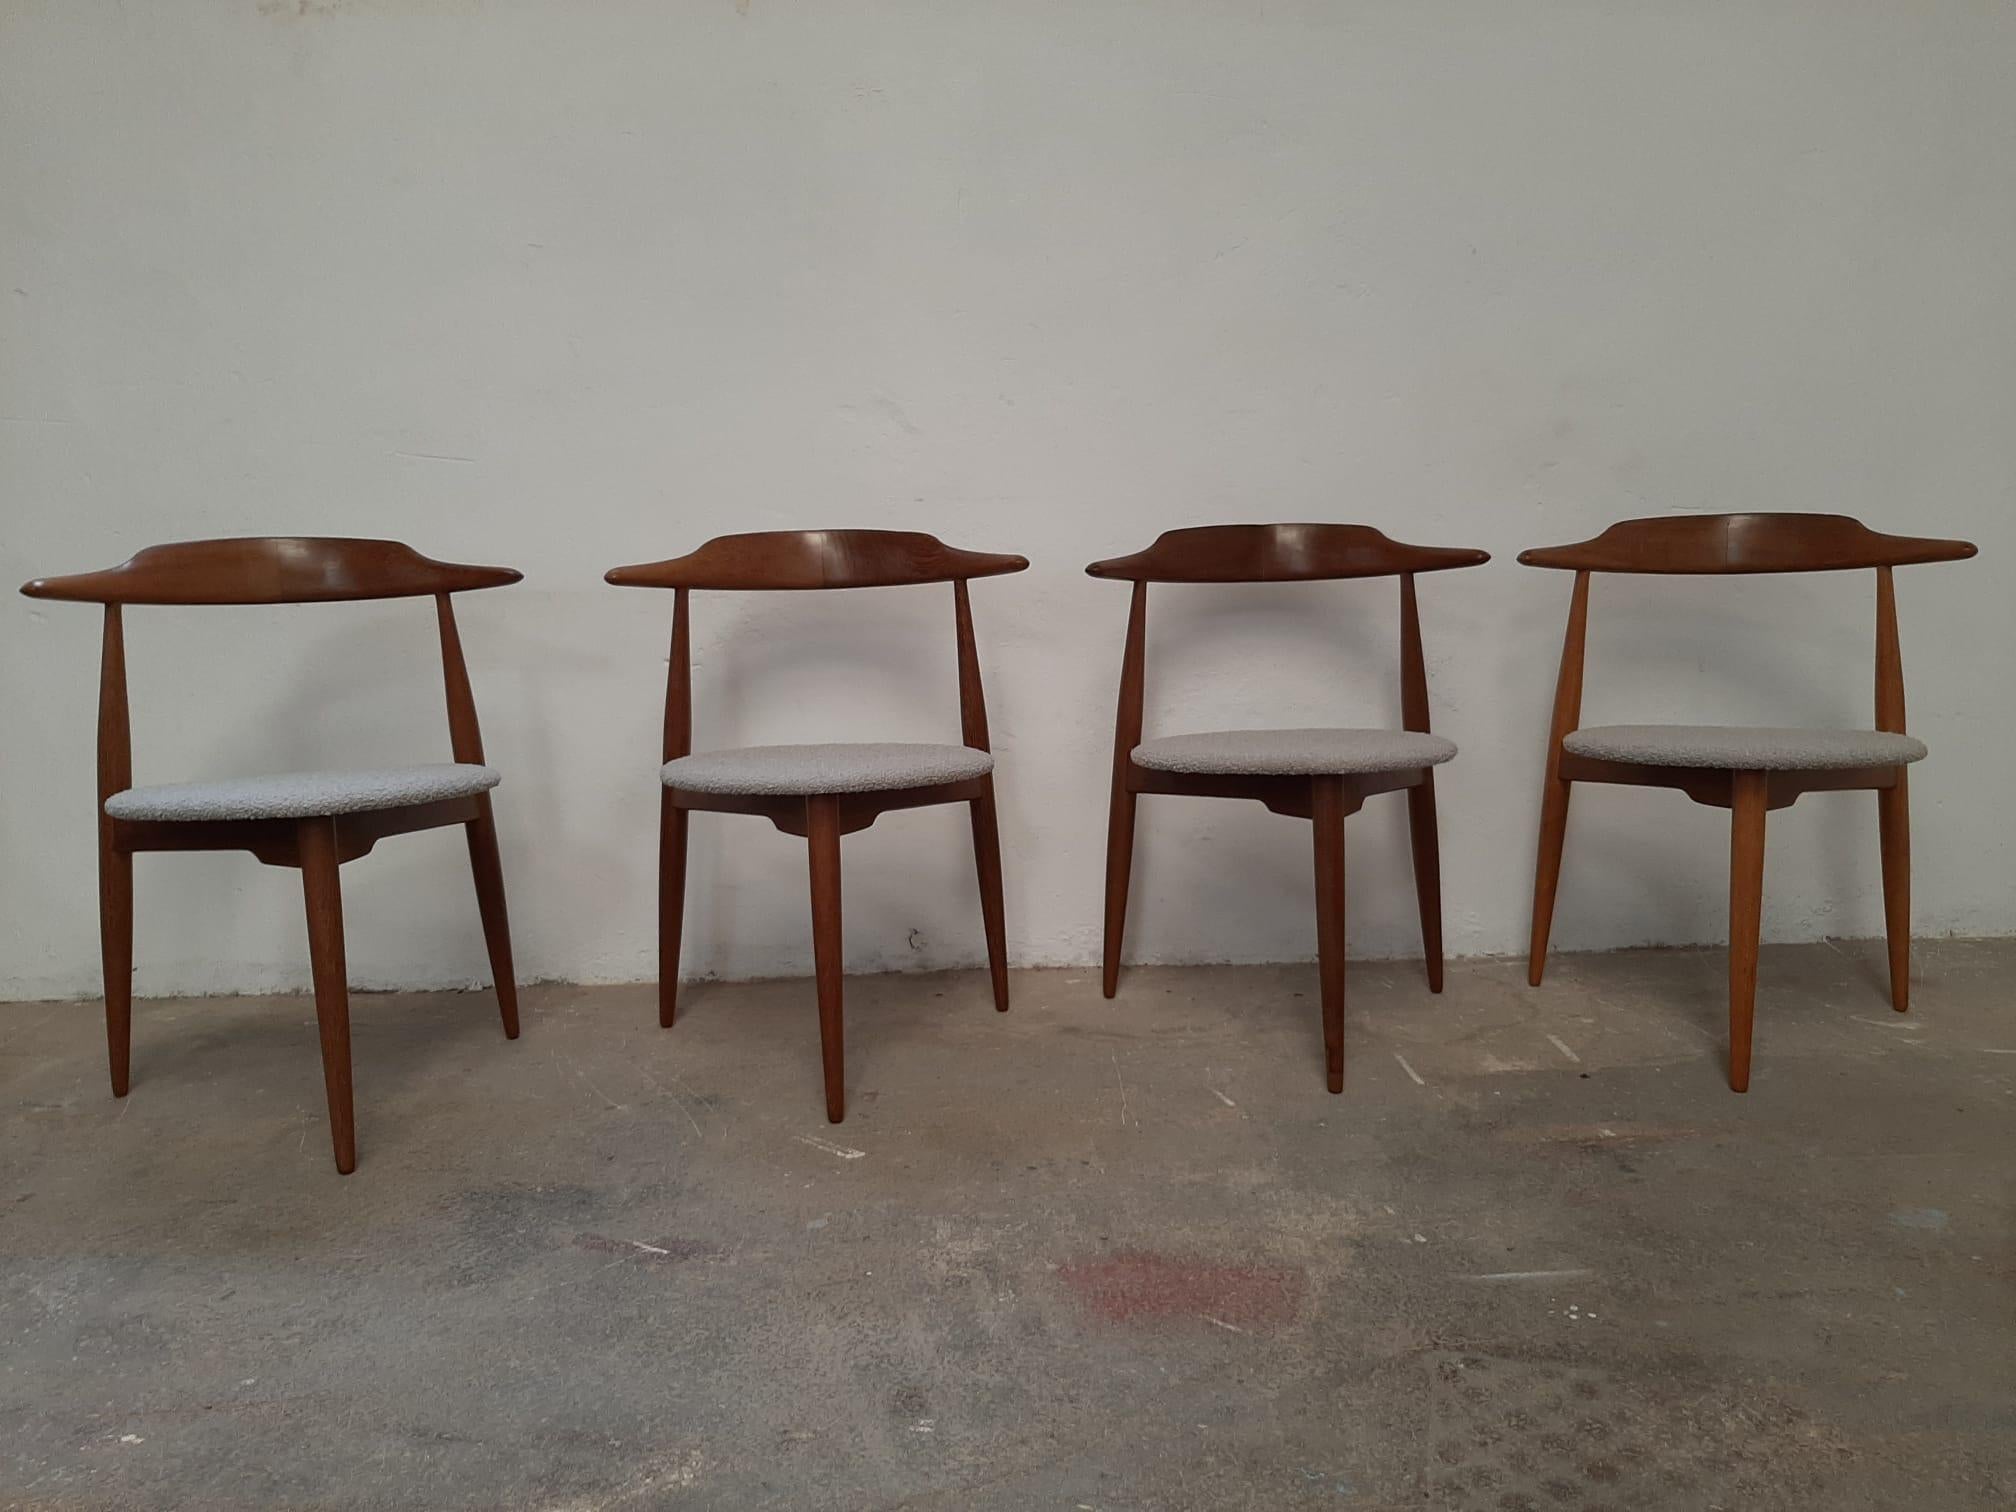 Set of Four Hans J. Wegner style three-legged heart chair, made in Denmark in the 1960s
Walnut wood structure
Reupholstered in Bisson Bruneel fabric

APPROX. DIMENSIONS:
Width 60cm (23-2/3in.)
Depth 50cm (19-2/3in.)
Height 75cm (29-1/2in.)
Seat